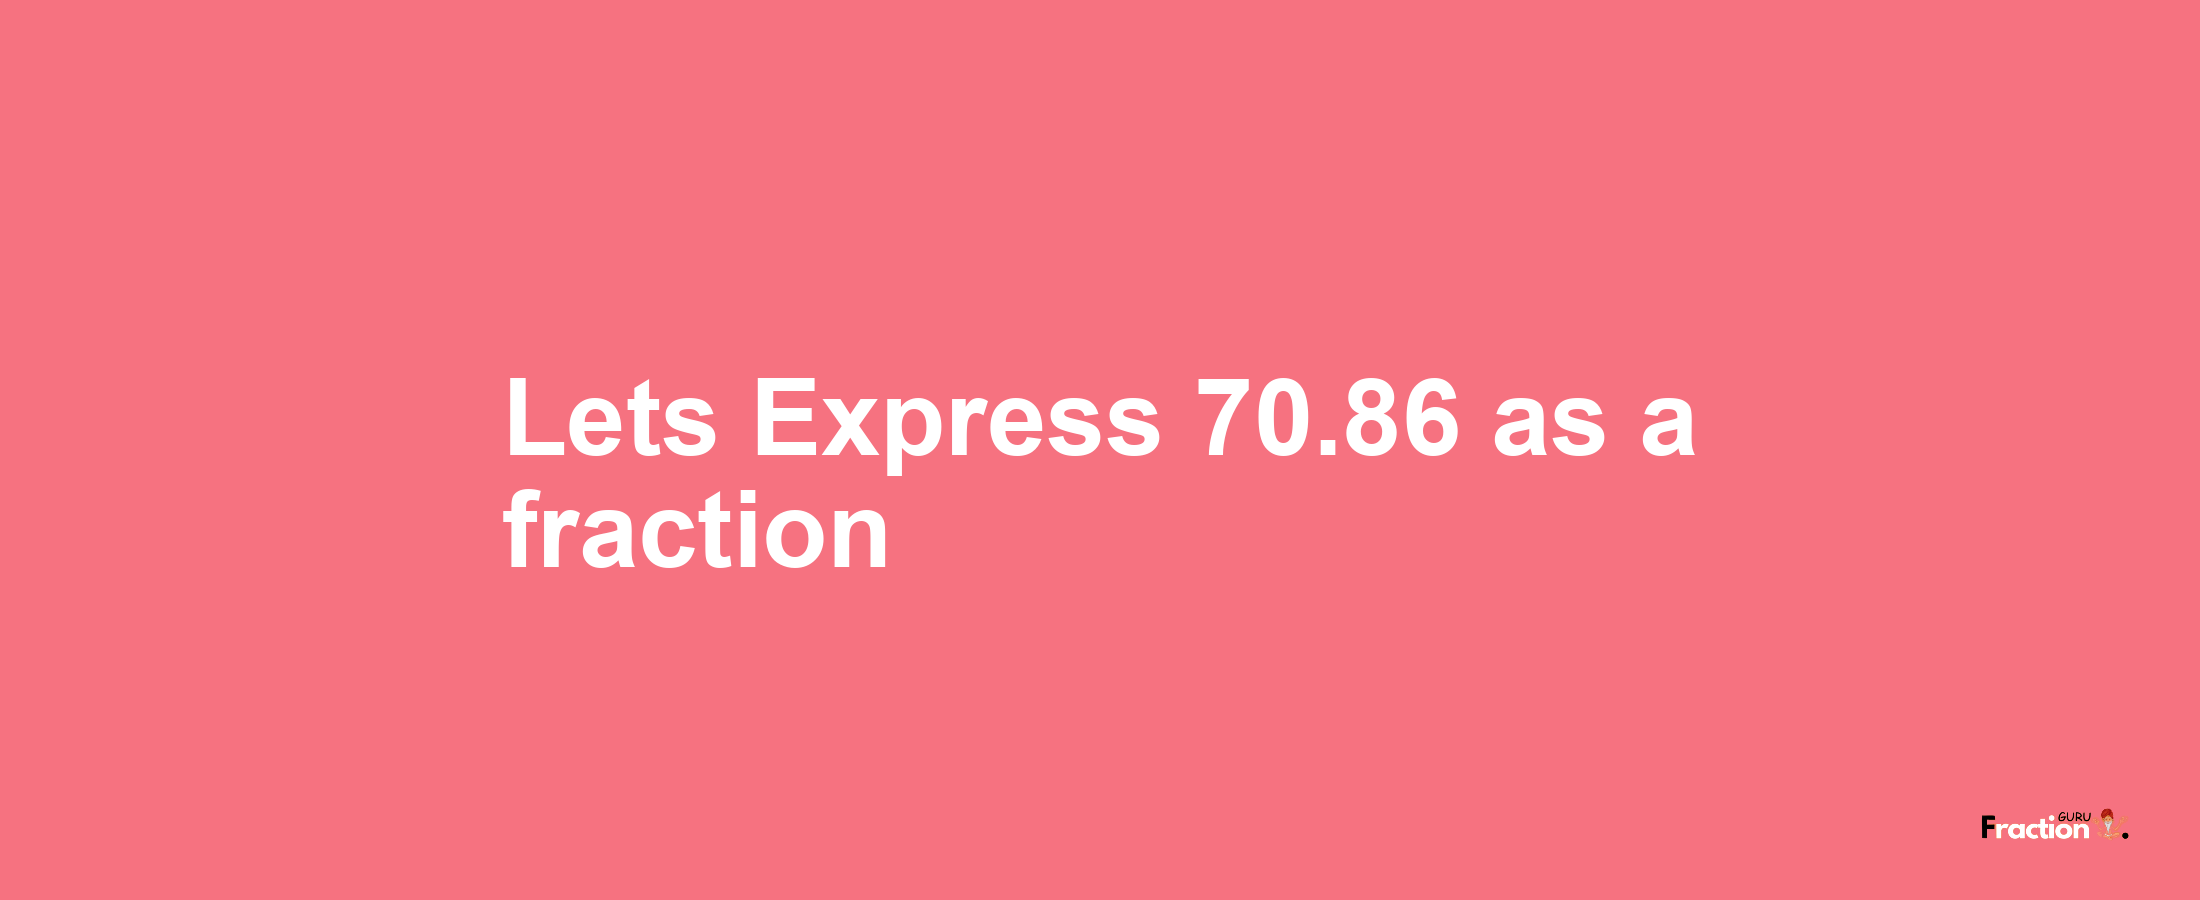 Lets Express 70.86 as afraction